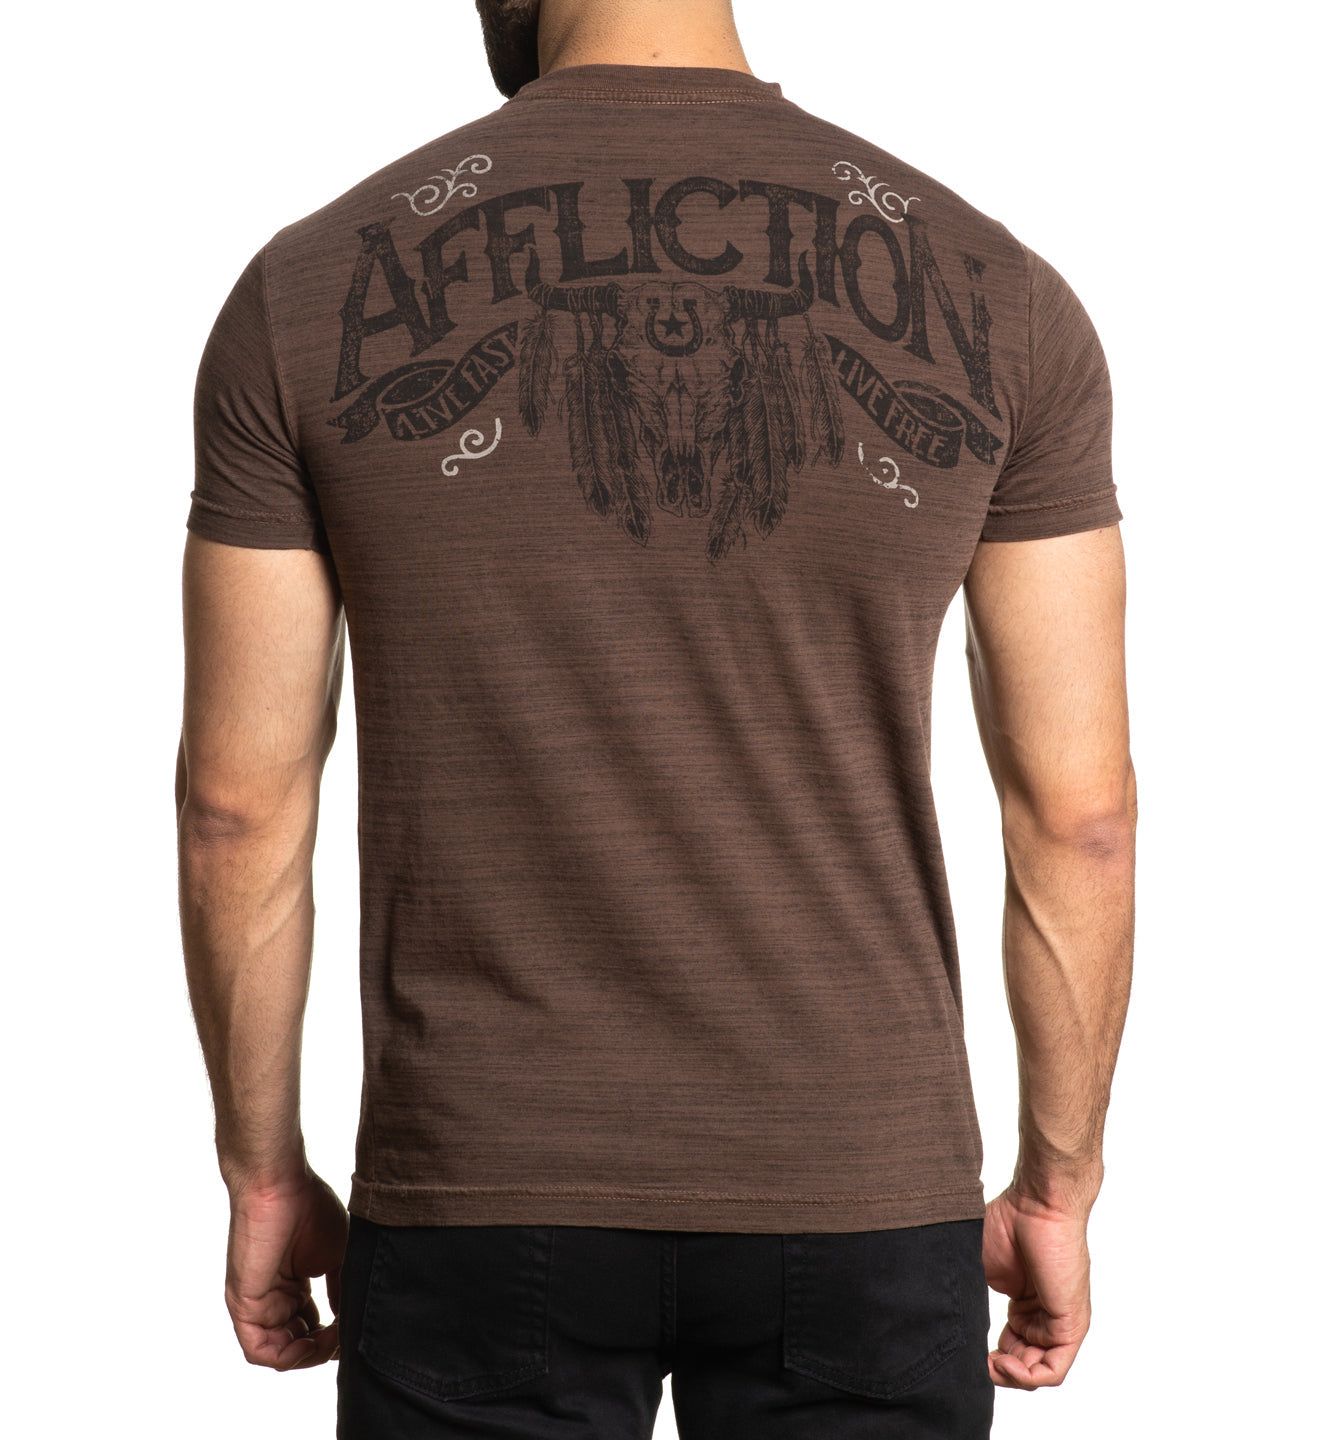 American Made - Affliction Clothing